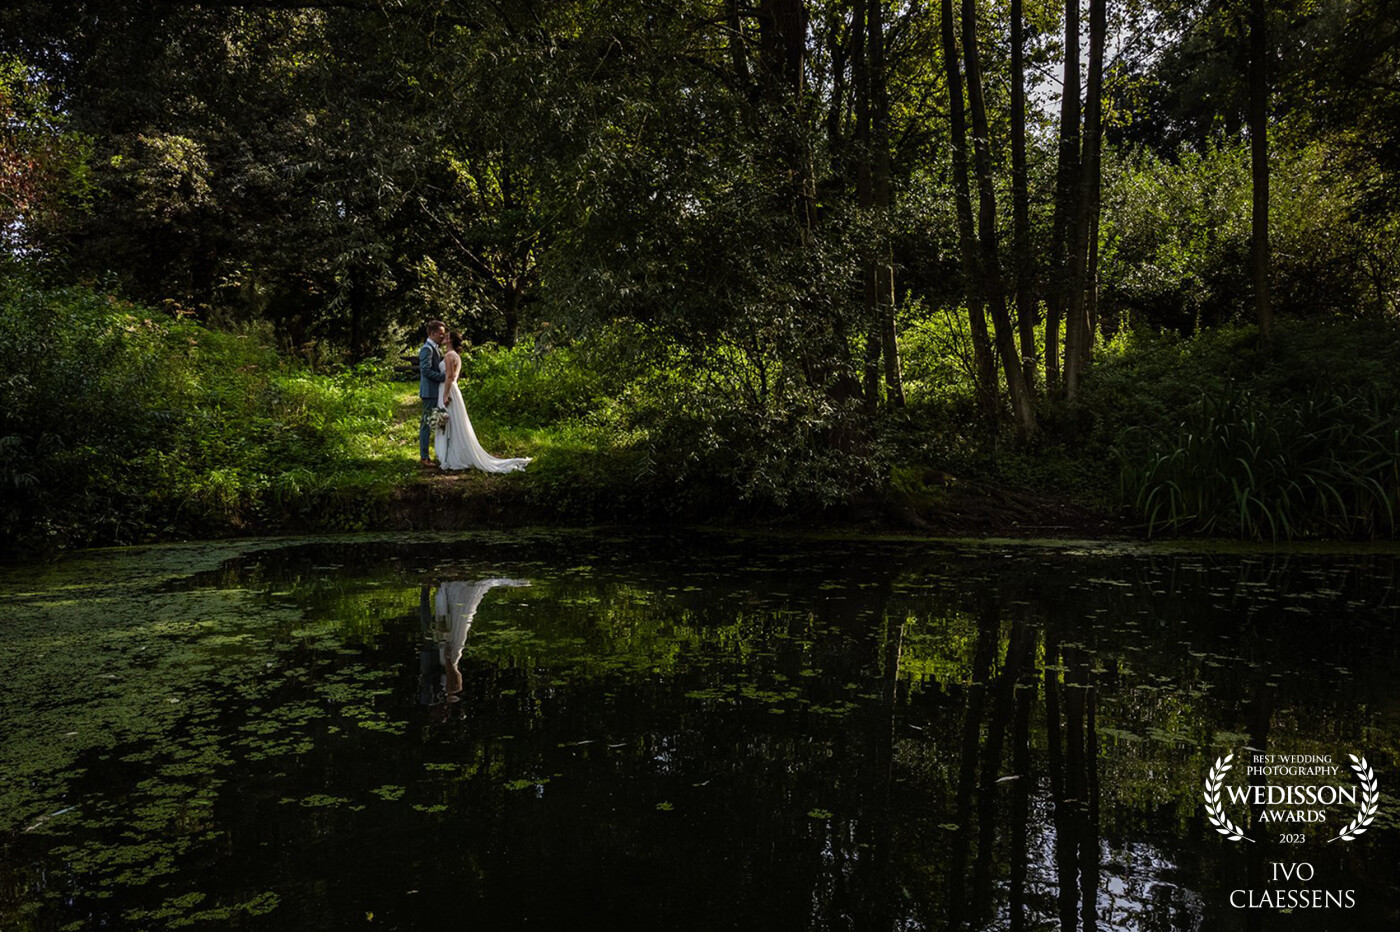 The photo was taken in Limburg, a beautiful and tranquil place in Heerlen, featuring a pond and lovely sunlight. I immediately noticed the reflection that could complete the entire scene. However, there was one problem: no way to get to the opposite side of the water where the bride and groom were. <br />
<br />
Now, you might wonder, "But you still took the photo." <br />
That's correct; we're not easily deterred. I took out the drone, positioned it in the middle of the pond, just above the water. This way, I found the perfect angle to capture this photo!